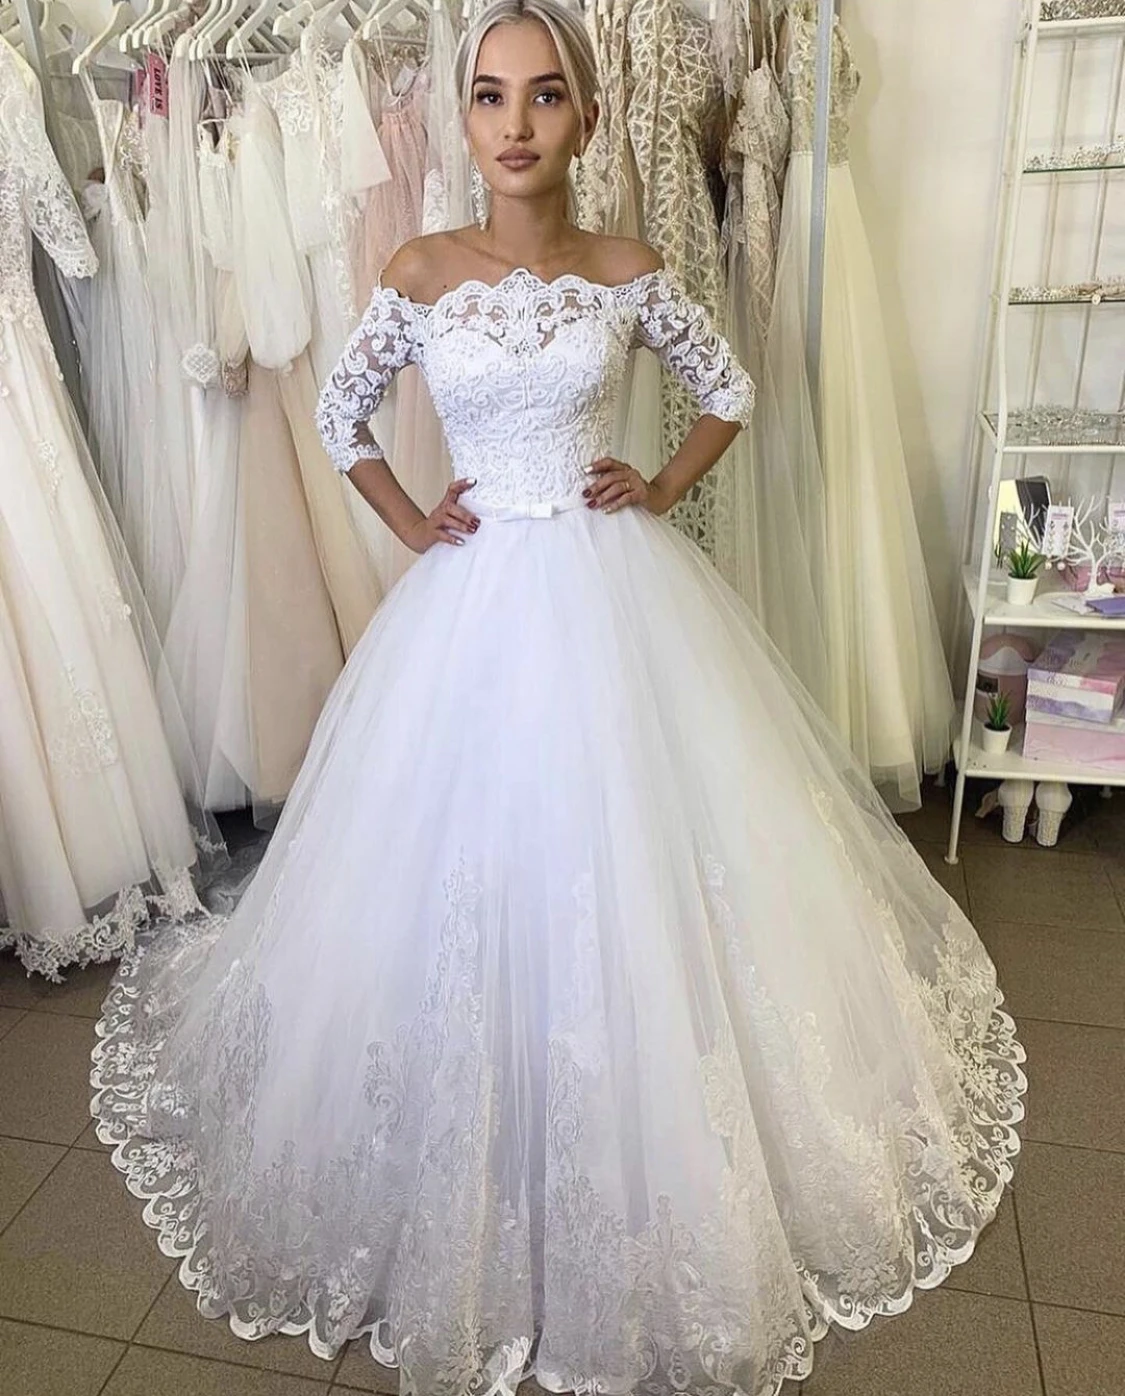 

Wedding Dress Ball Boat Neck Three Quarter Lace Appliques Beads Bow Floor Length Sweep Train Gorgeous Bridal Gown Custom Made